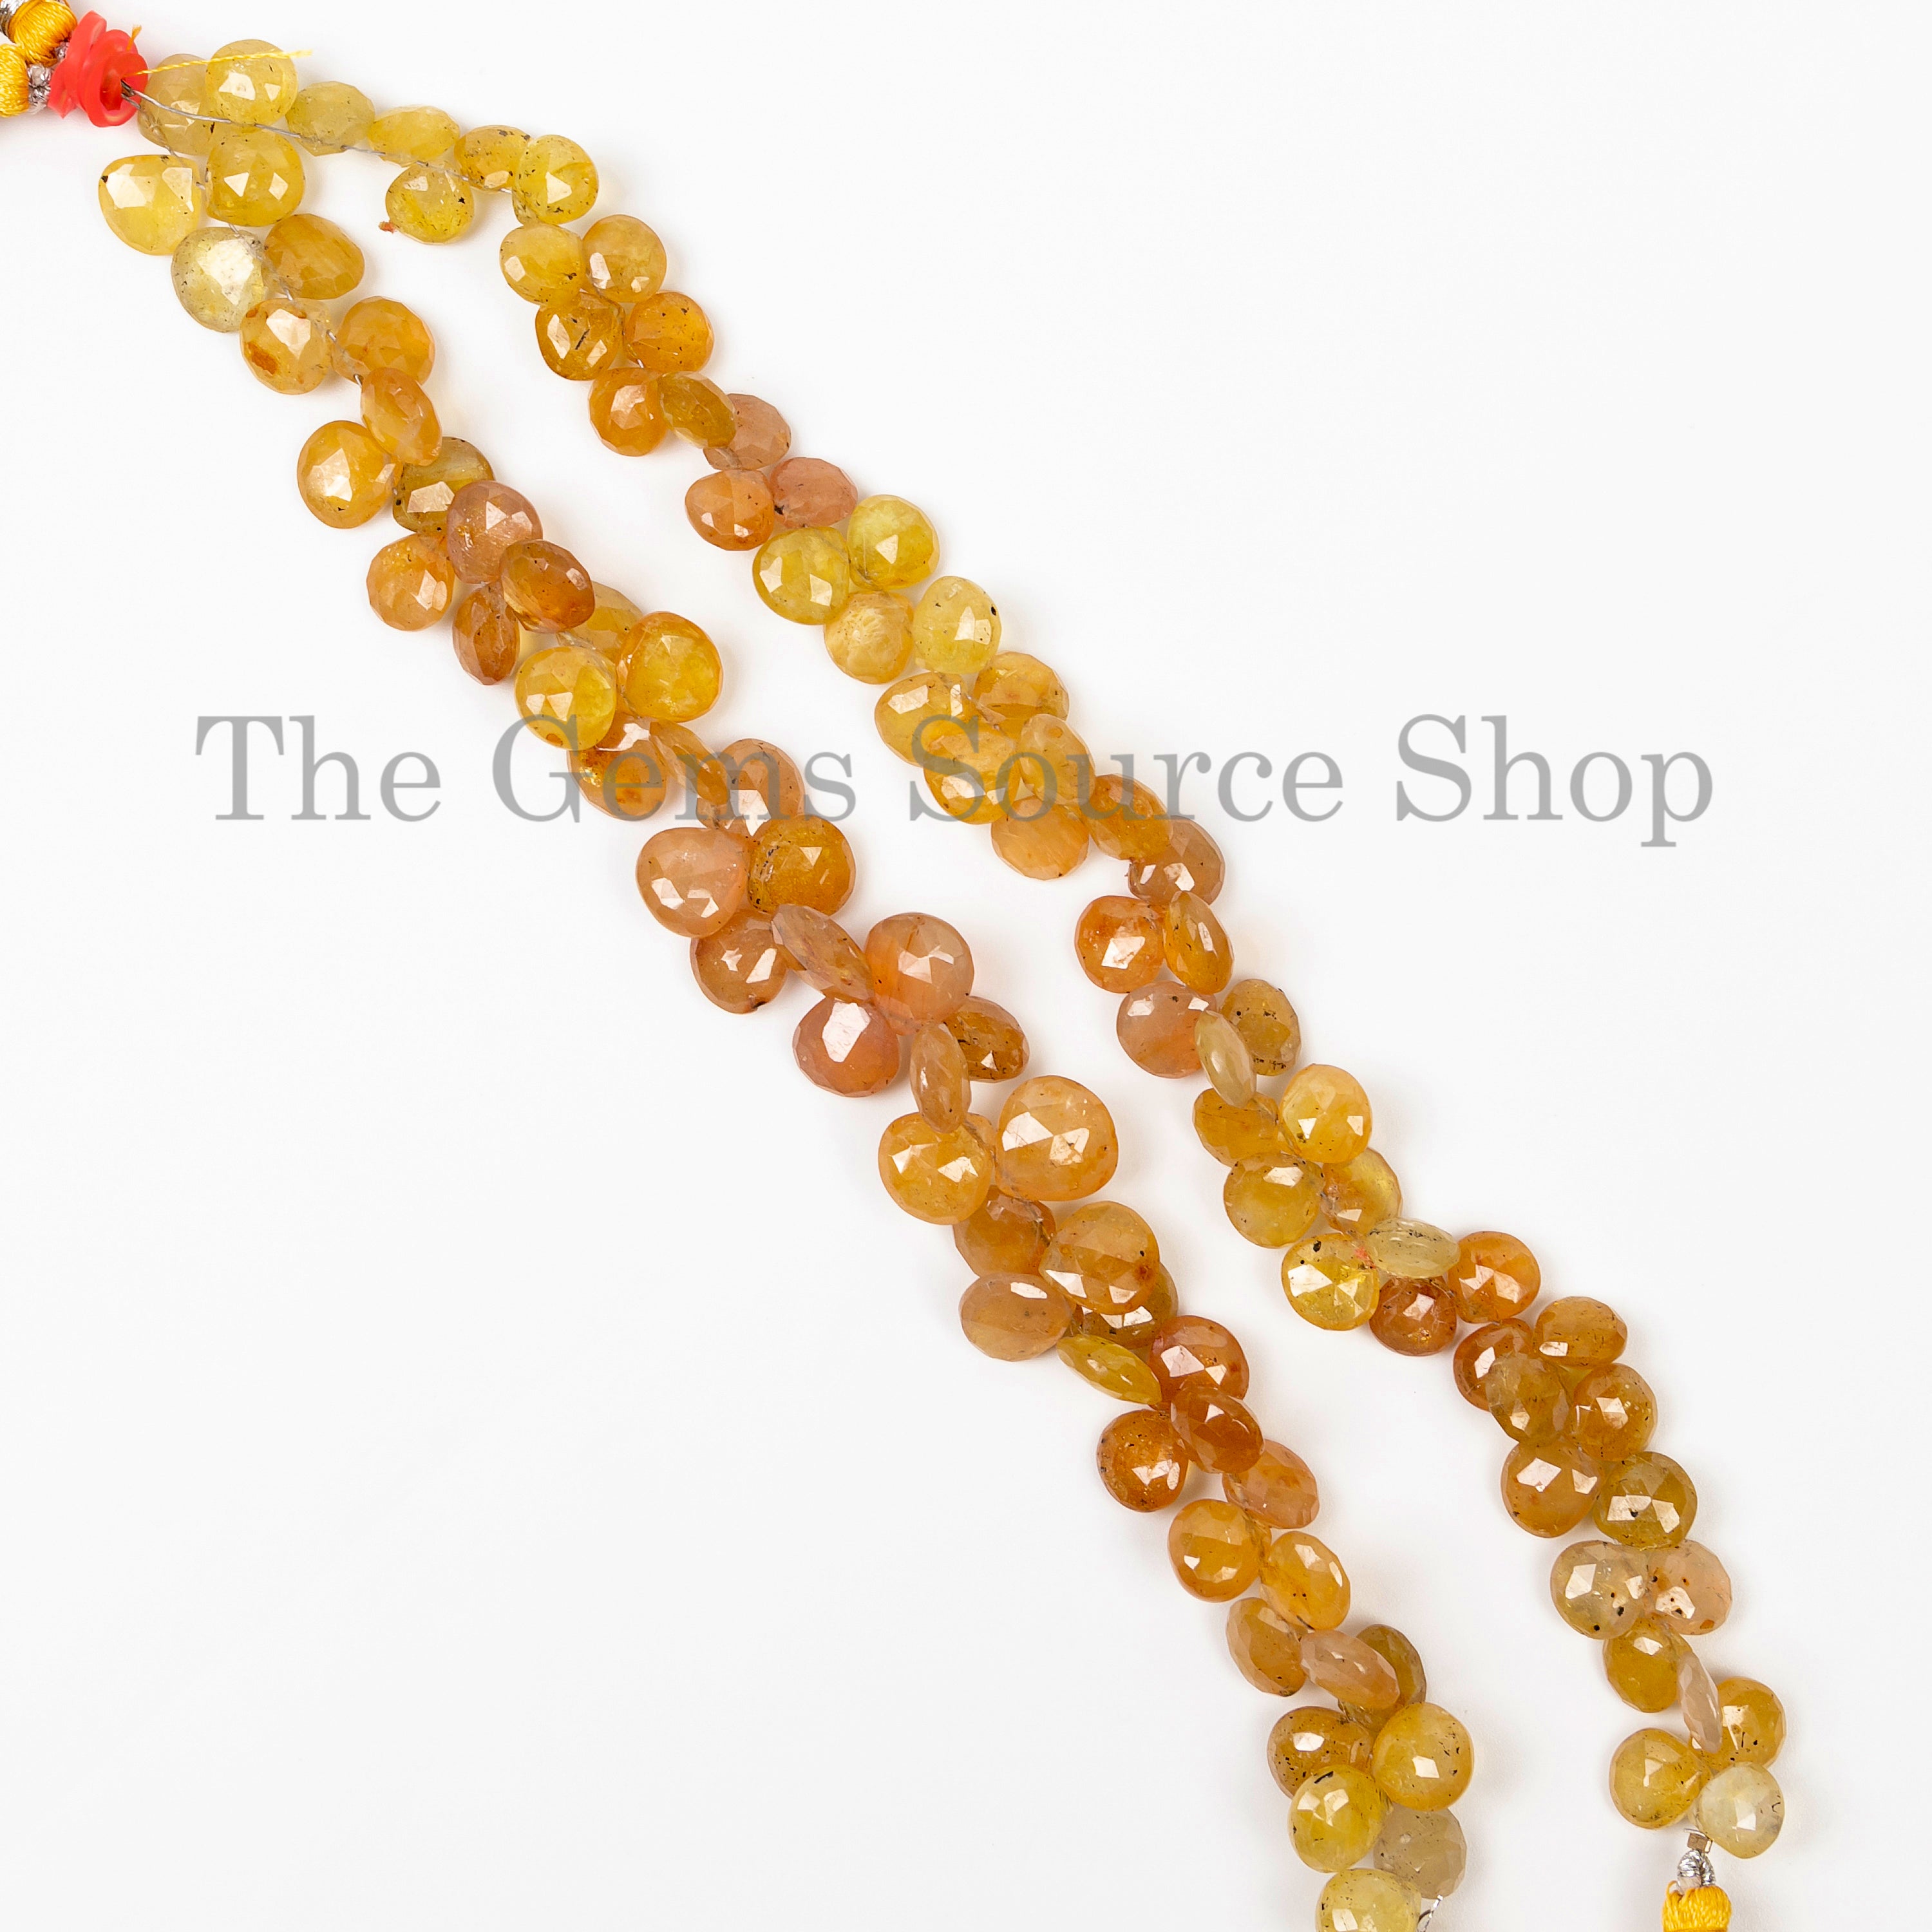 Yellow Sapphire Faceted Heart Beads, Heart Shape Sapphire Beads, Natural Sapphire Beads for Jewelry Making. TGS-5052